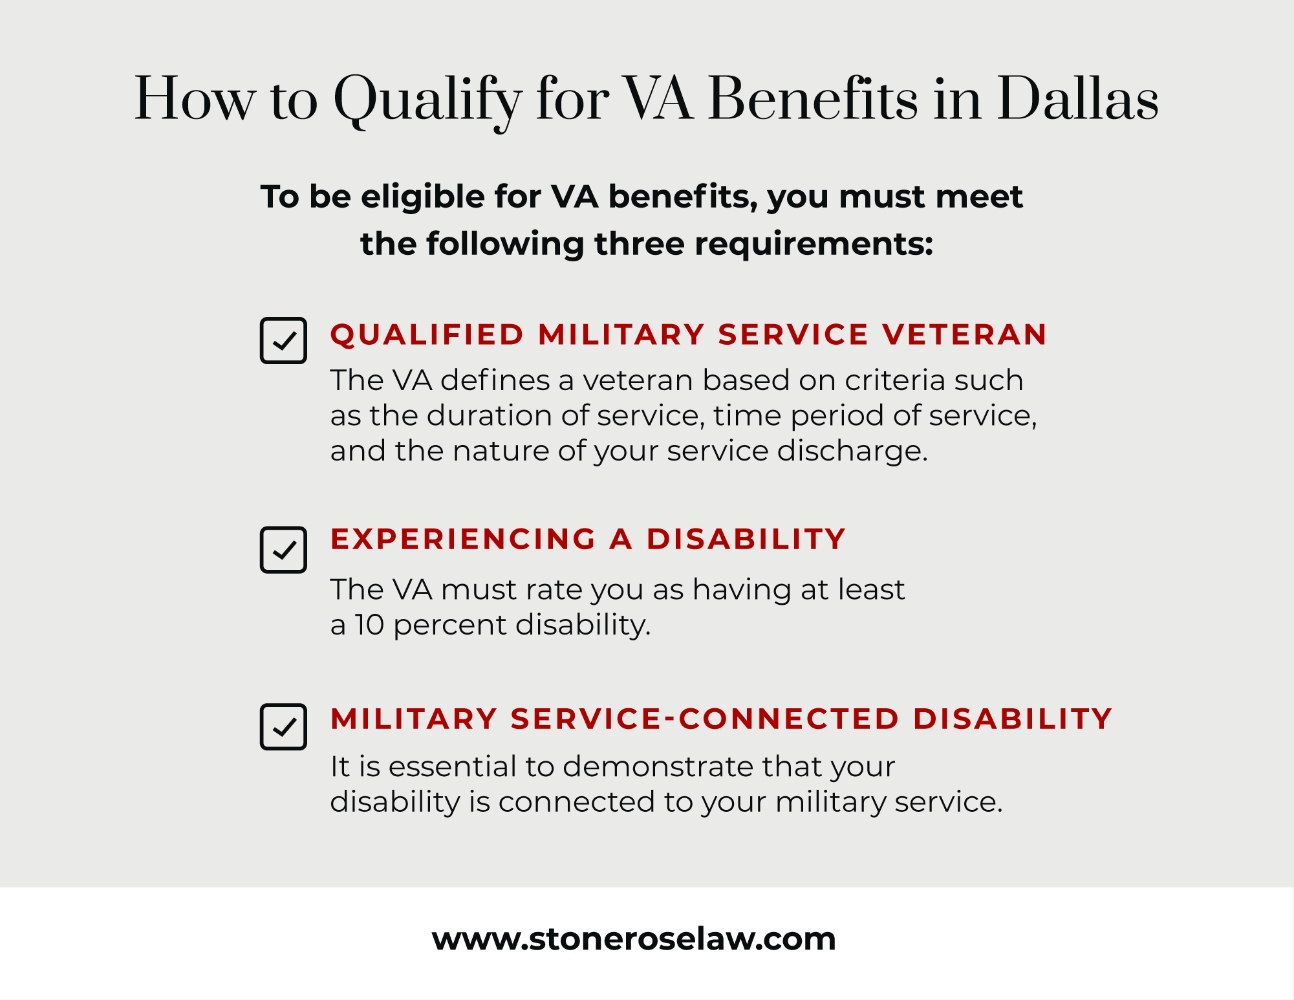 How to qualify for VA benefits in Dallas